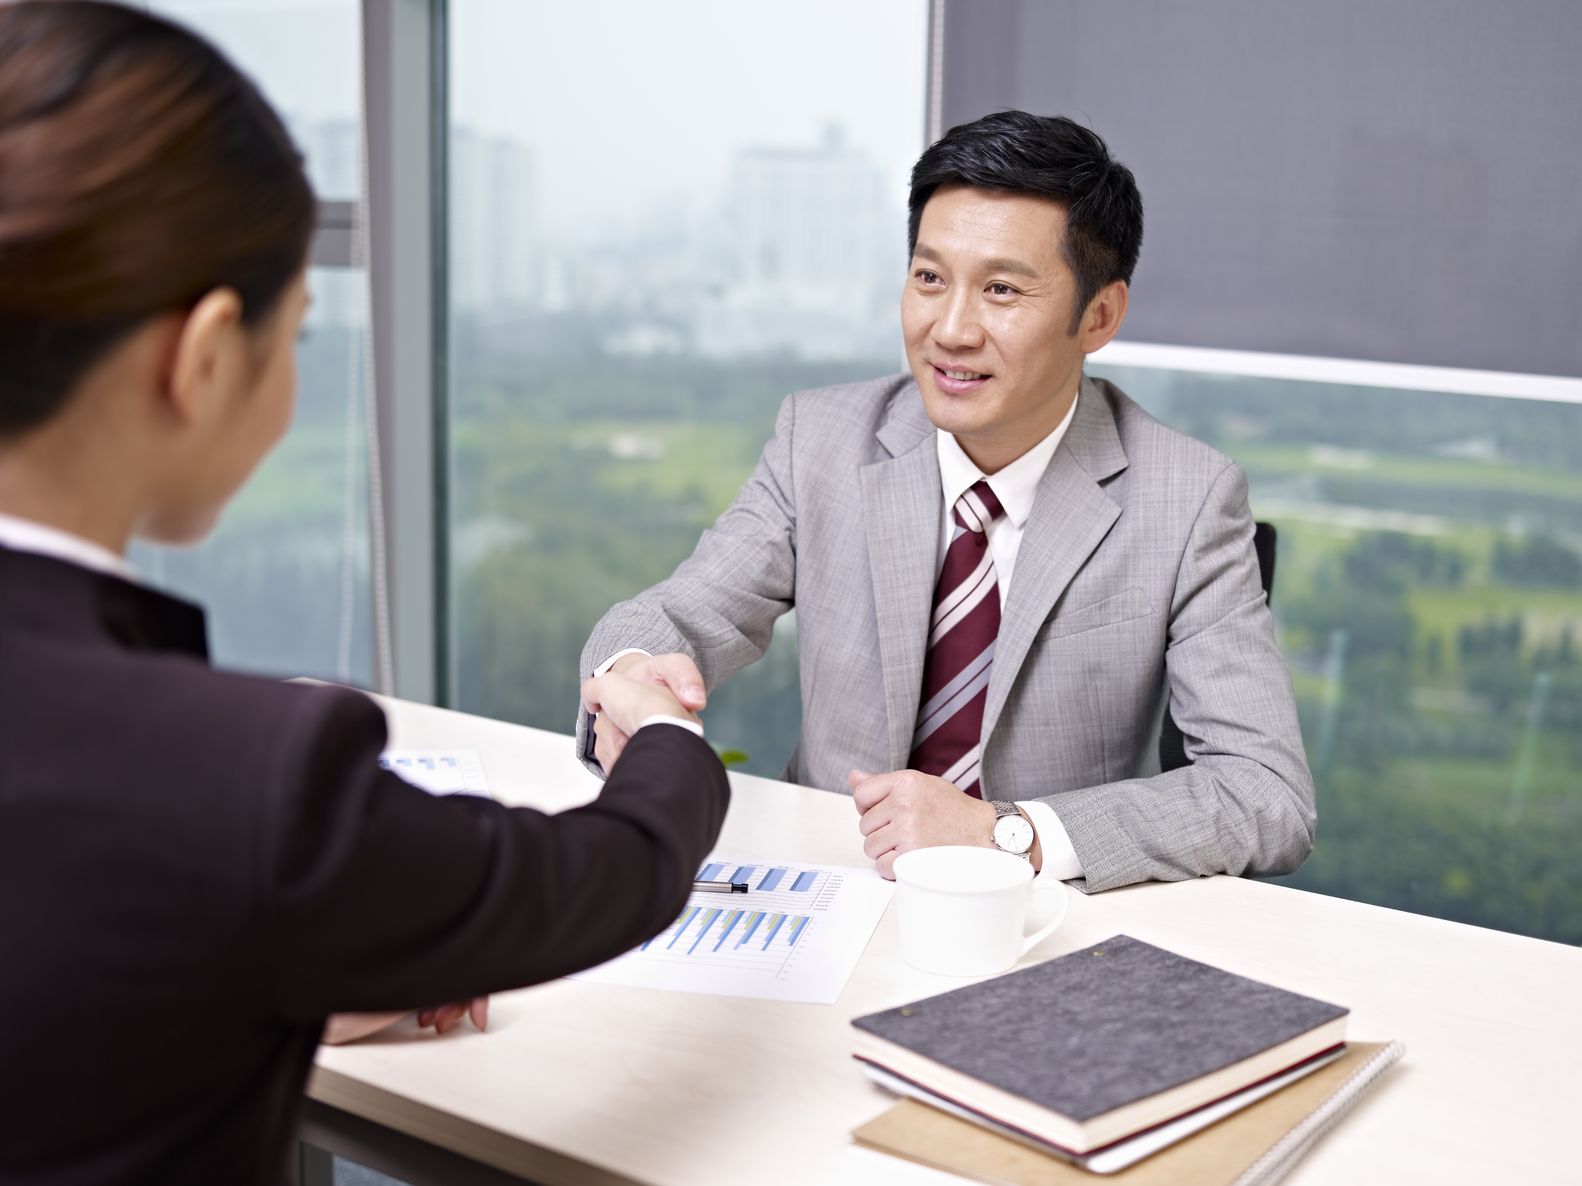 job interview china common interview questions and answers